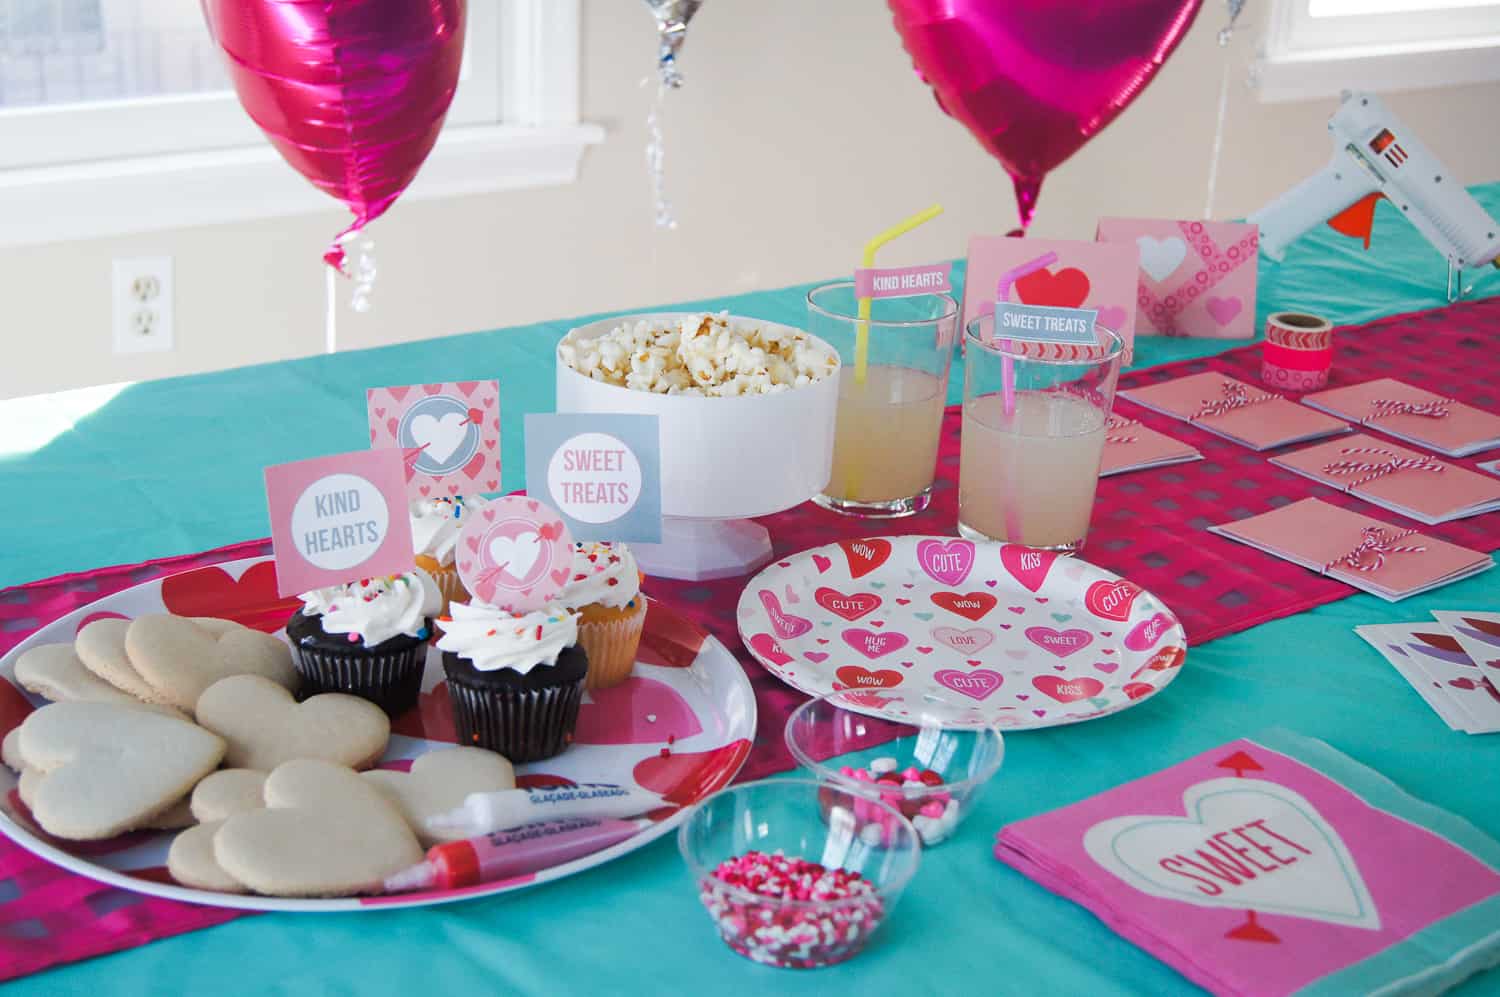 Valentine's Day play date with crafts and treats